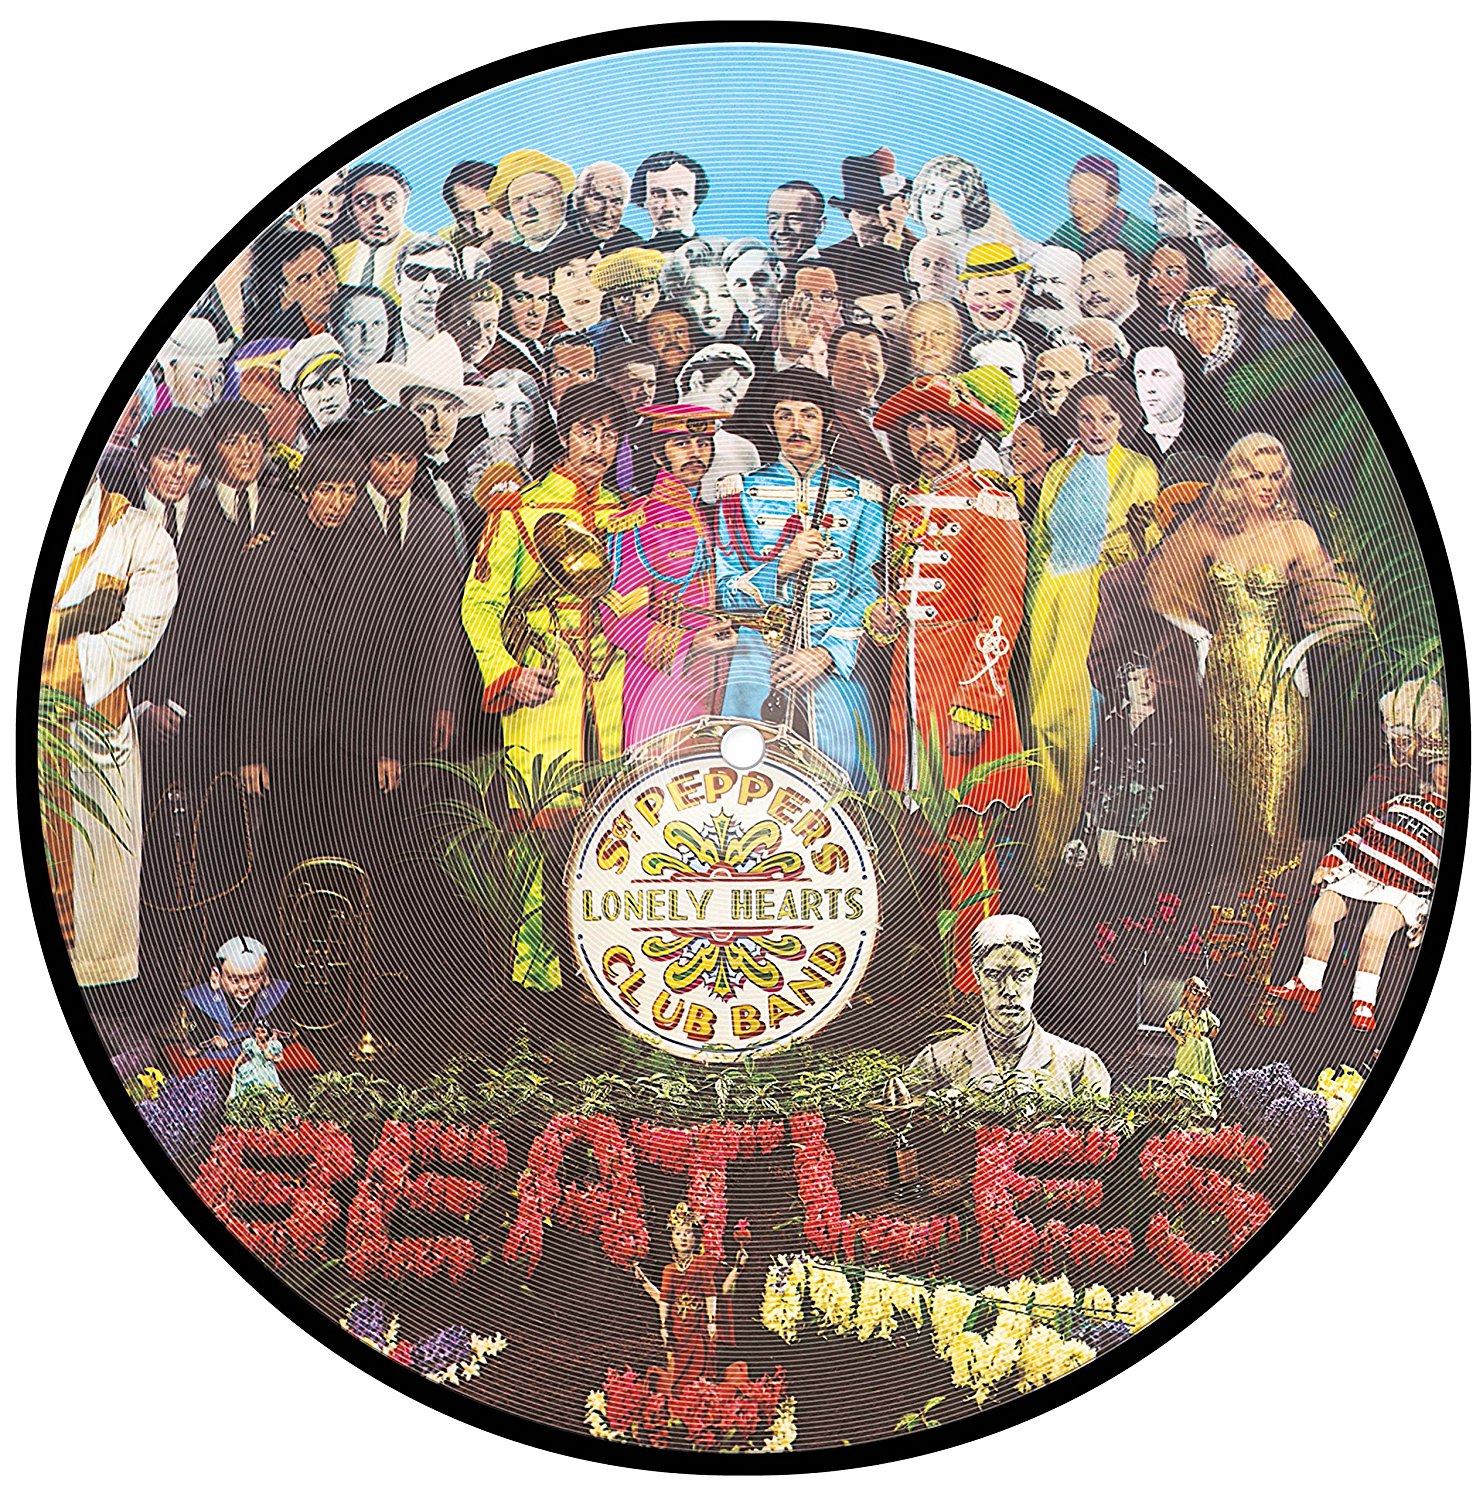 Beatles sgt pepper lonely. The Beatles Sgt. Pepper's Lonely Hearts Club Band 1967. The Beatles Sgt. Pepper's Lonely Hearts Club Band 2017. Sgt Pepper s Lonely Hearts Club Band. Битлз Sgt Pepper s Lonely Hearts Club Band.